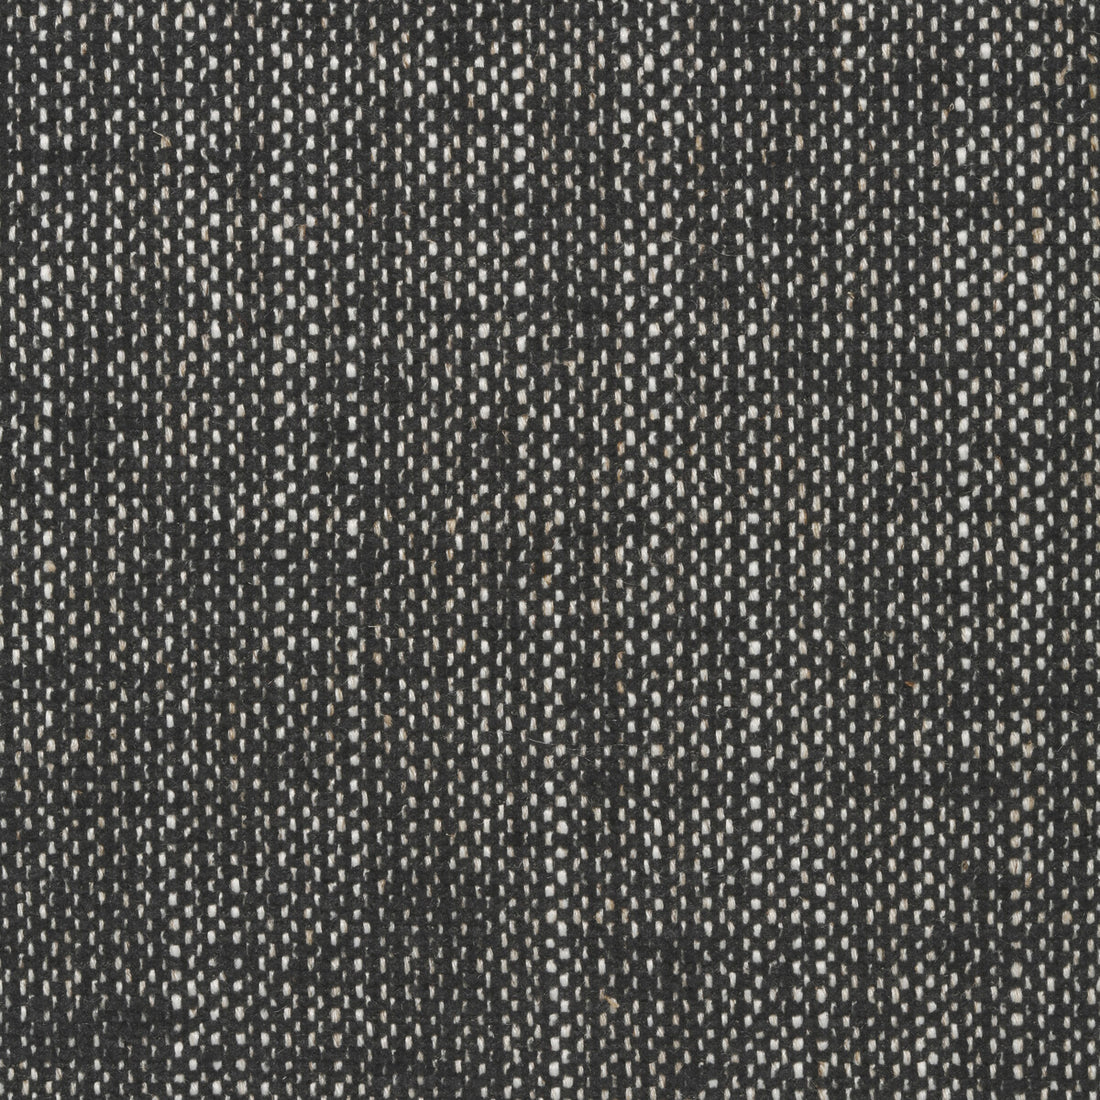 Kravet Contract fabric in 35112-81 color - pattern 35112.81.0 - by Kravet Contract in the Crypton Incase collection